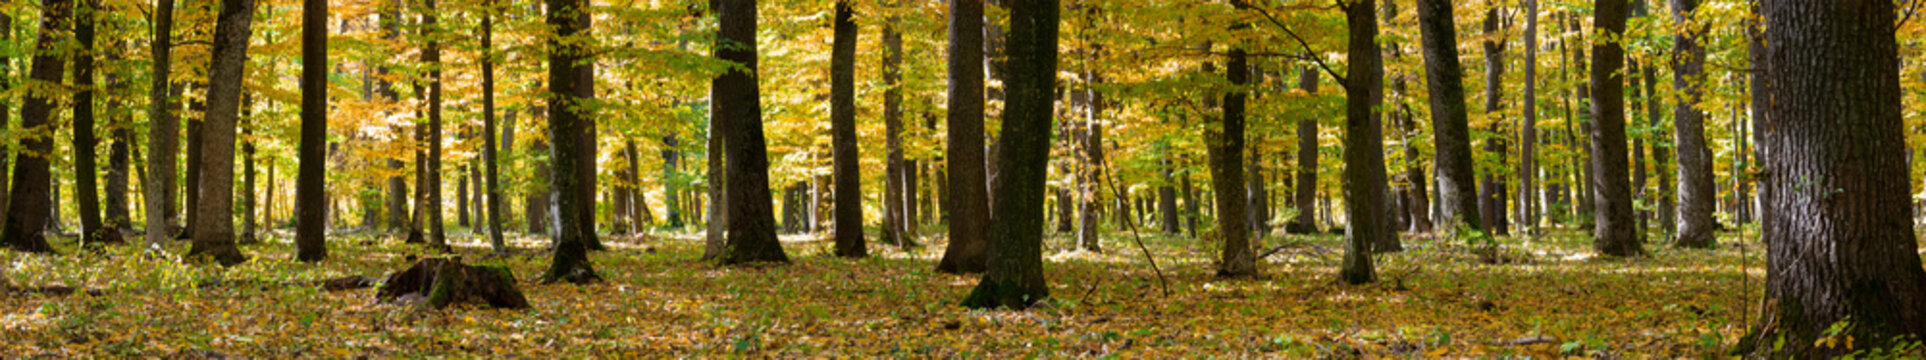 Image of yellow trees in the autumn forest. Panorama of nature in autumn in the forest between the fallen leaves of trees